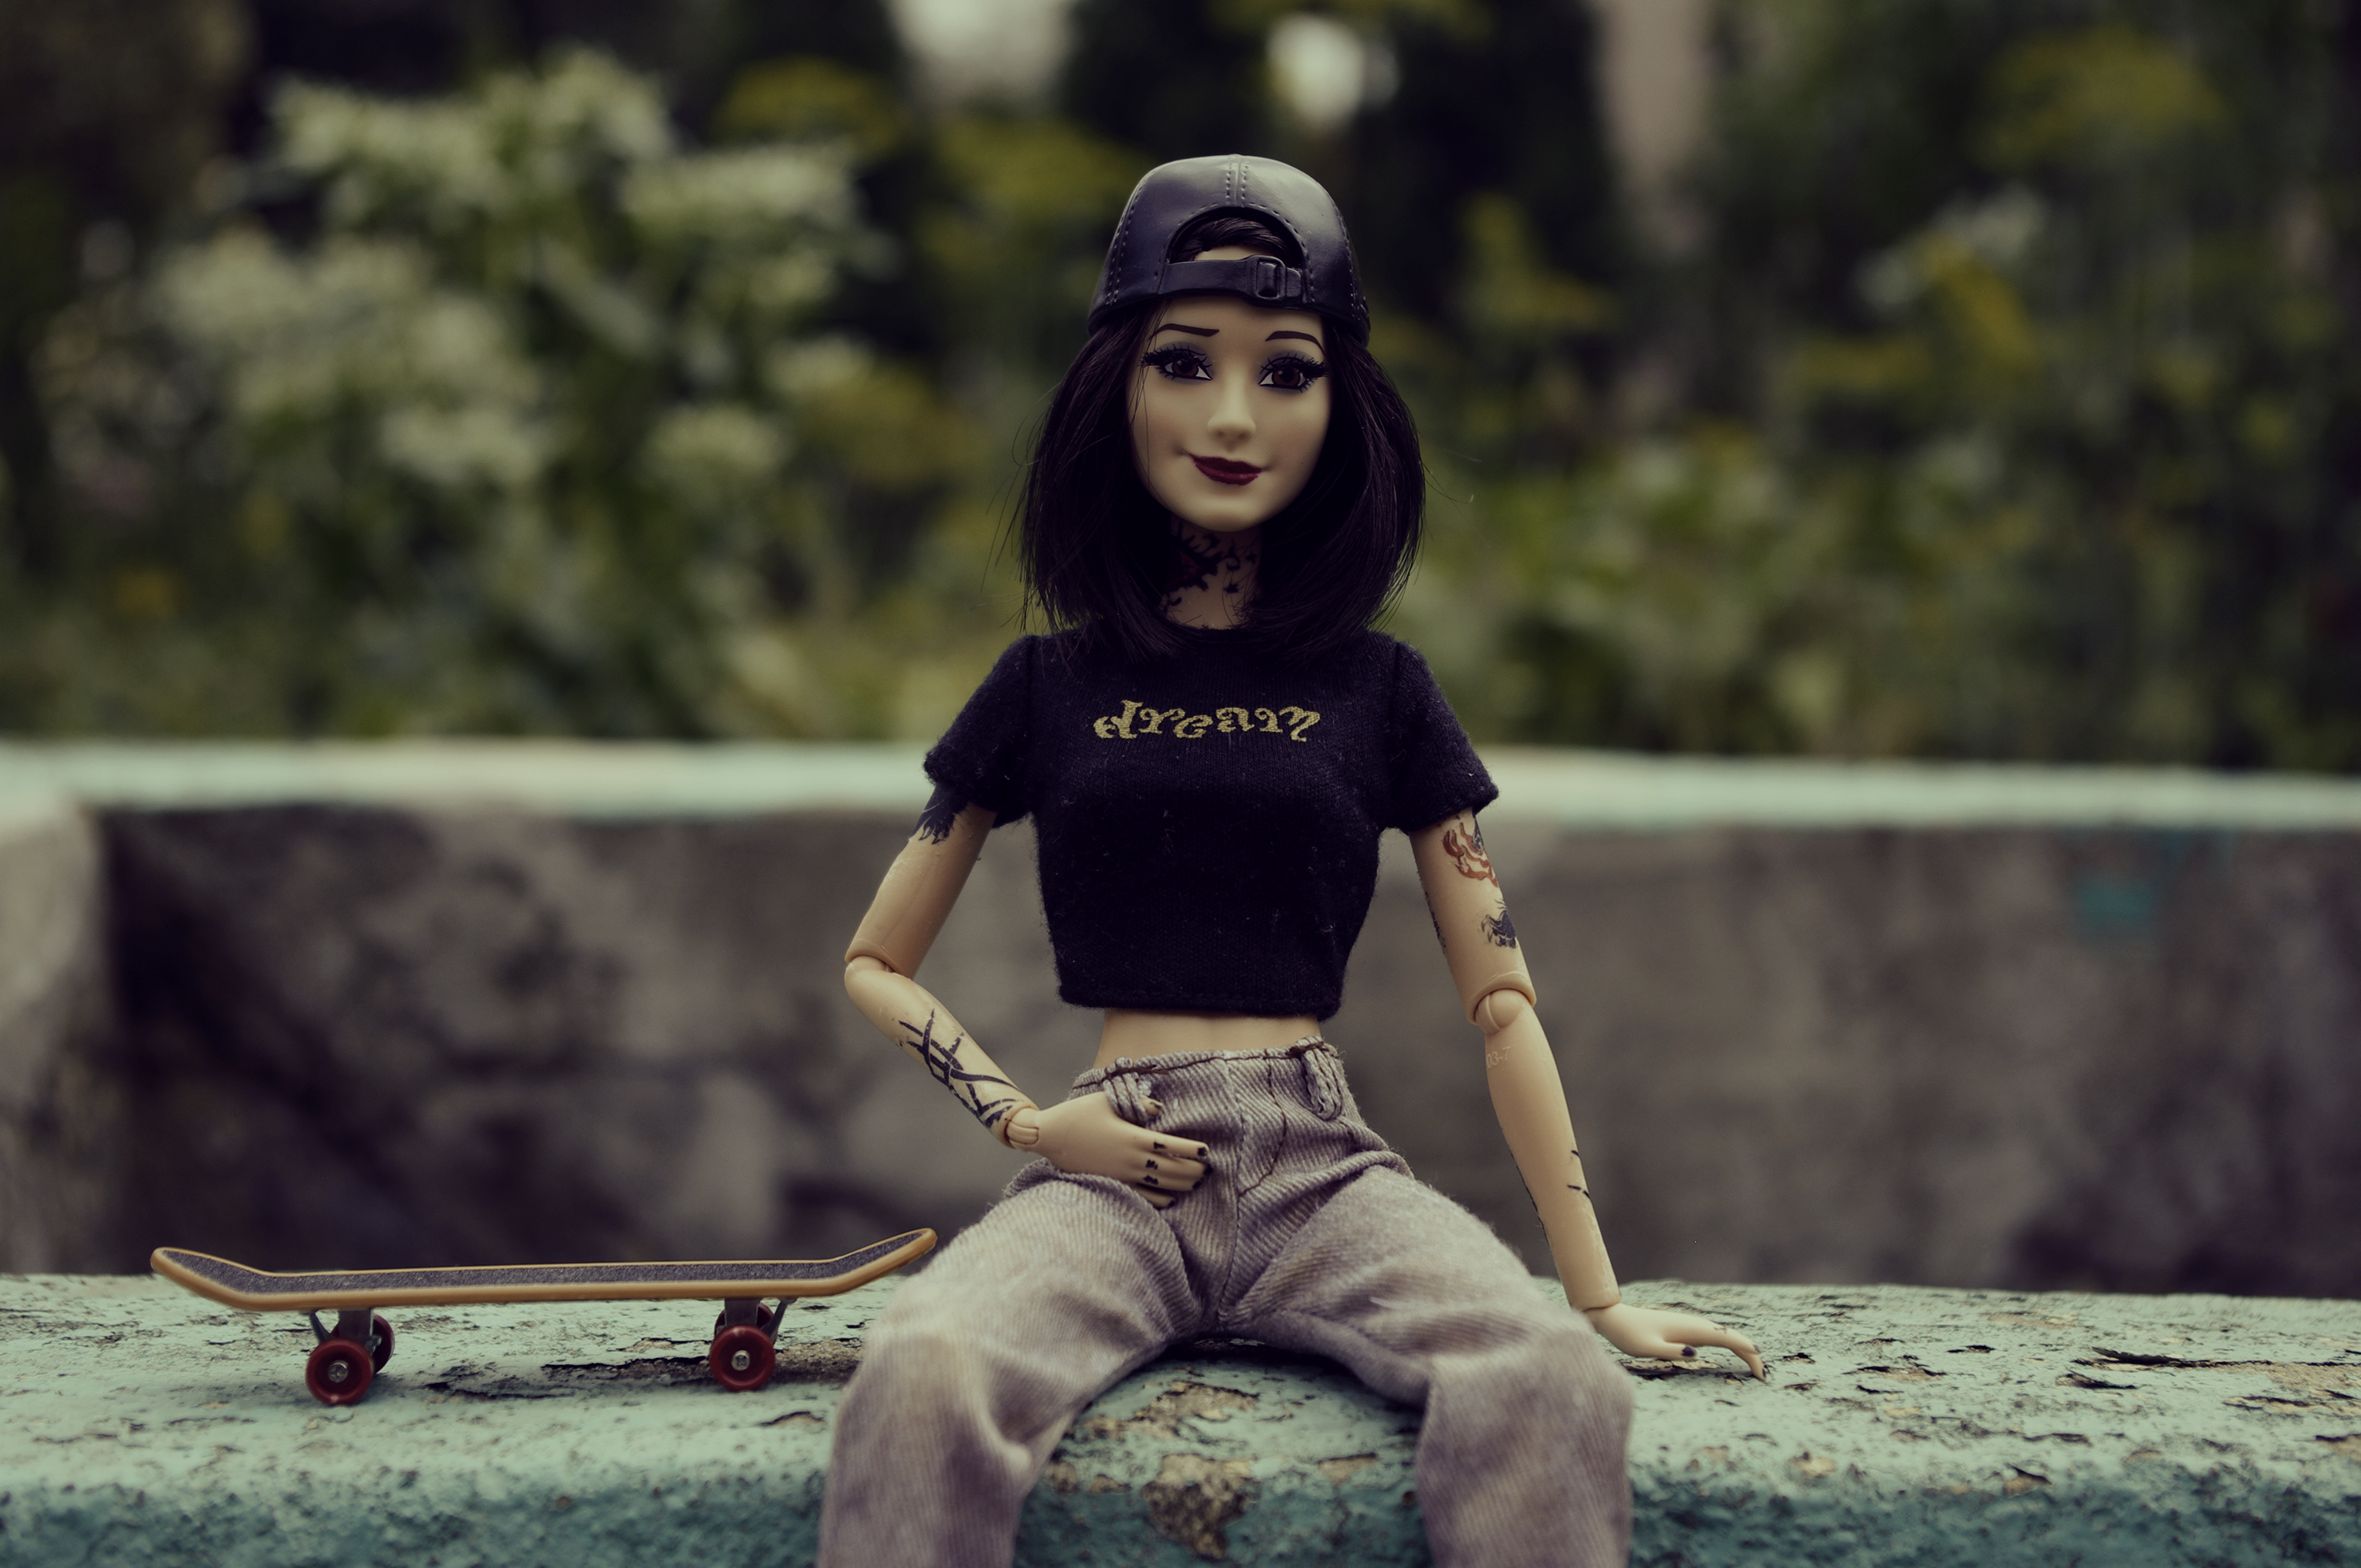 General 3000x1993 Barbie doll toys hat leather dark hair tattoo skateboard skateboarding looking at viewer smiling blurred blurry background